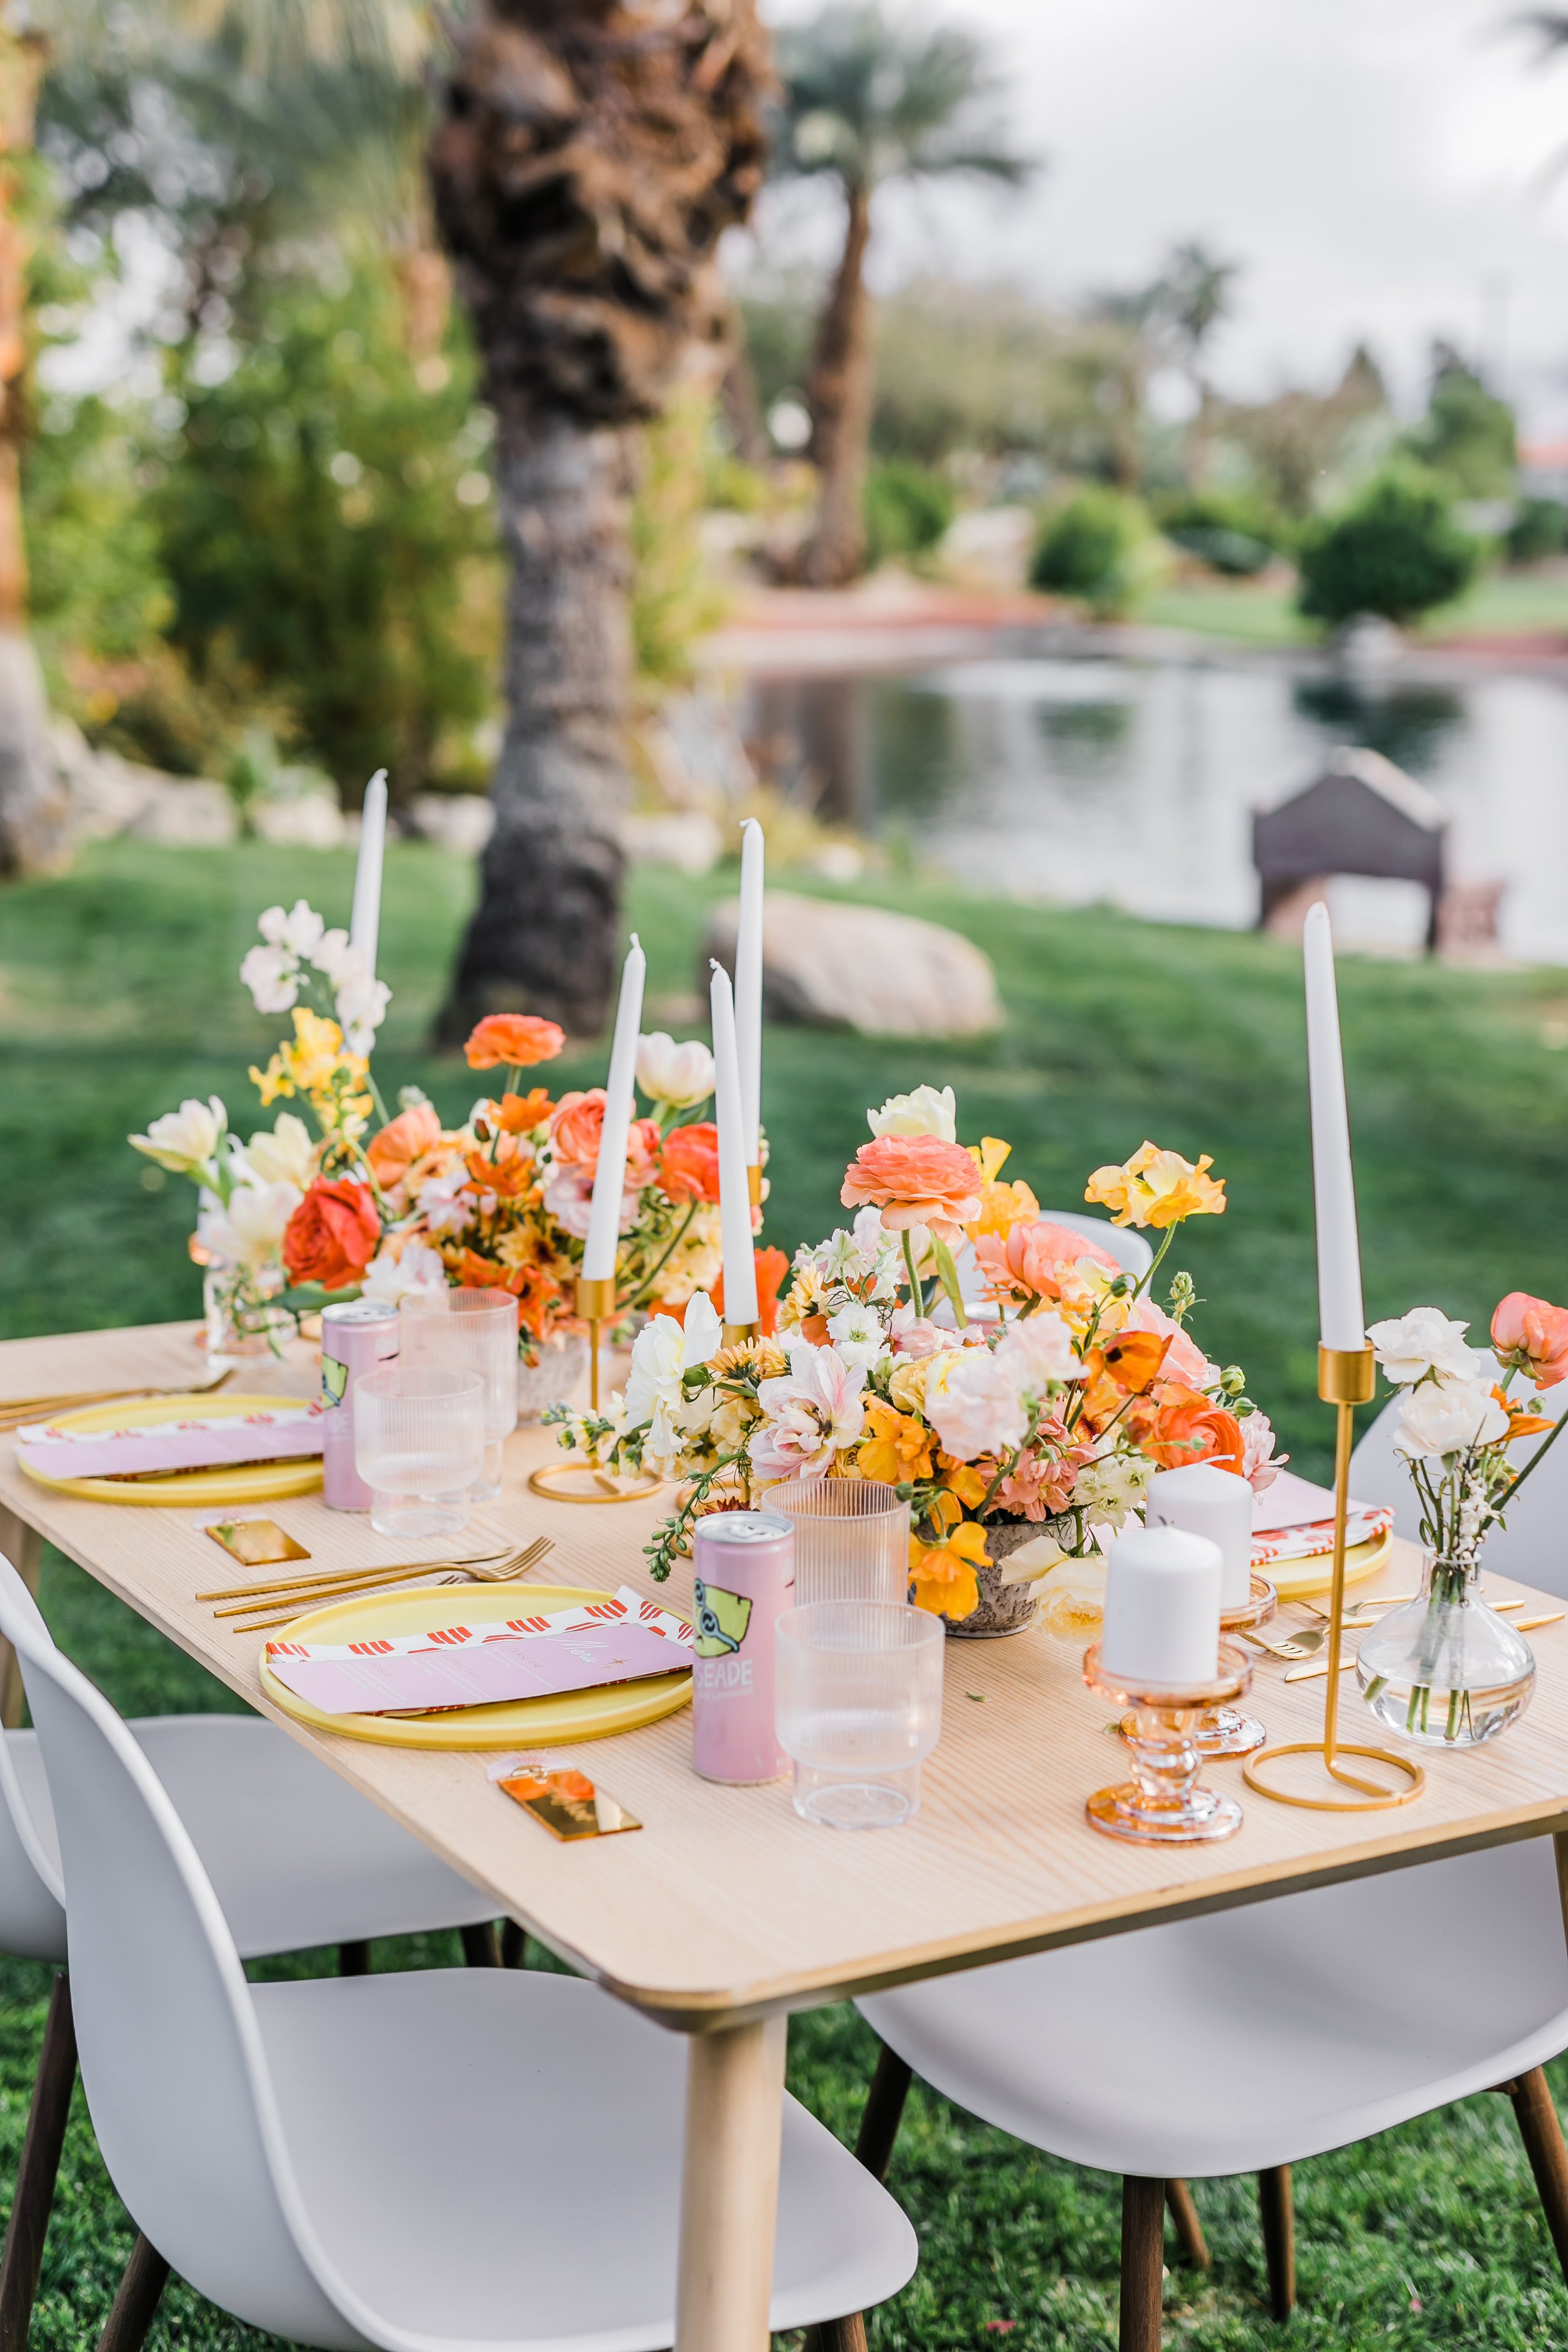 Bright sunny reception table scape flowers and wedding decor at Palm Springs wedding elopement at Bougainvillea Estate.